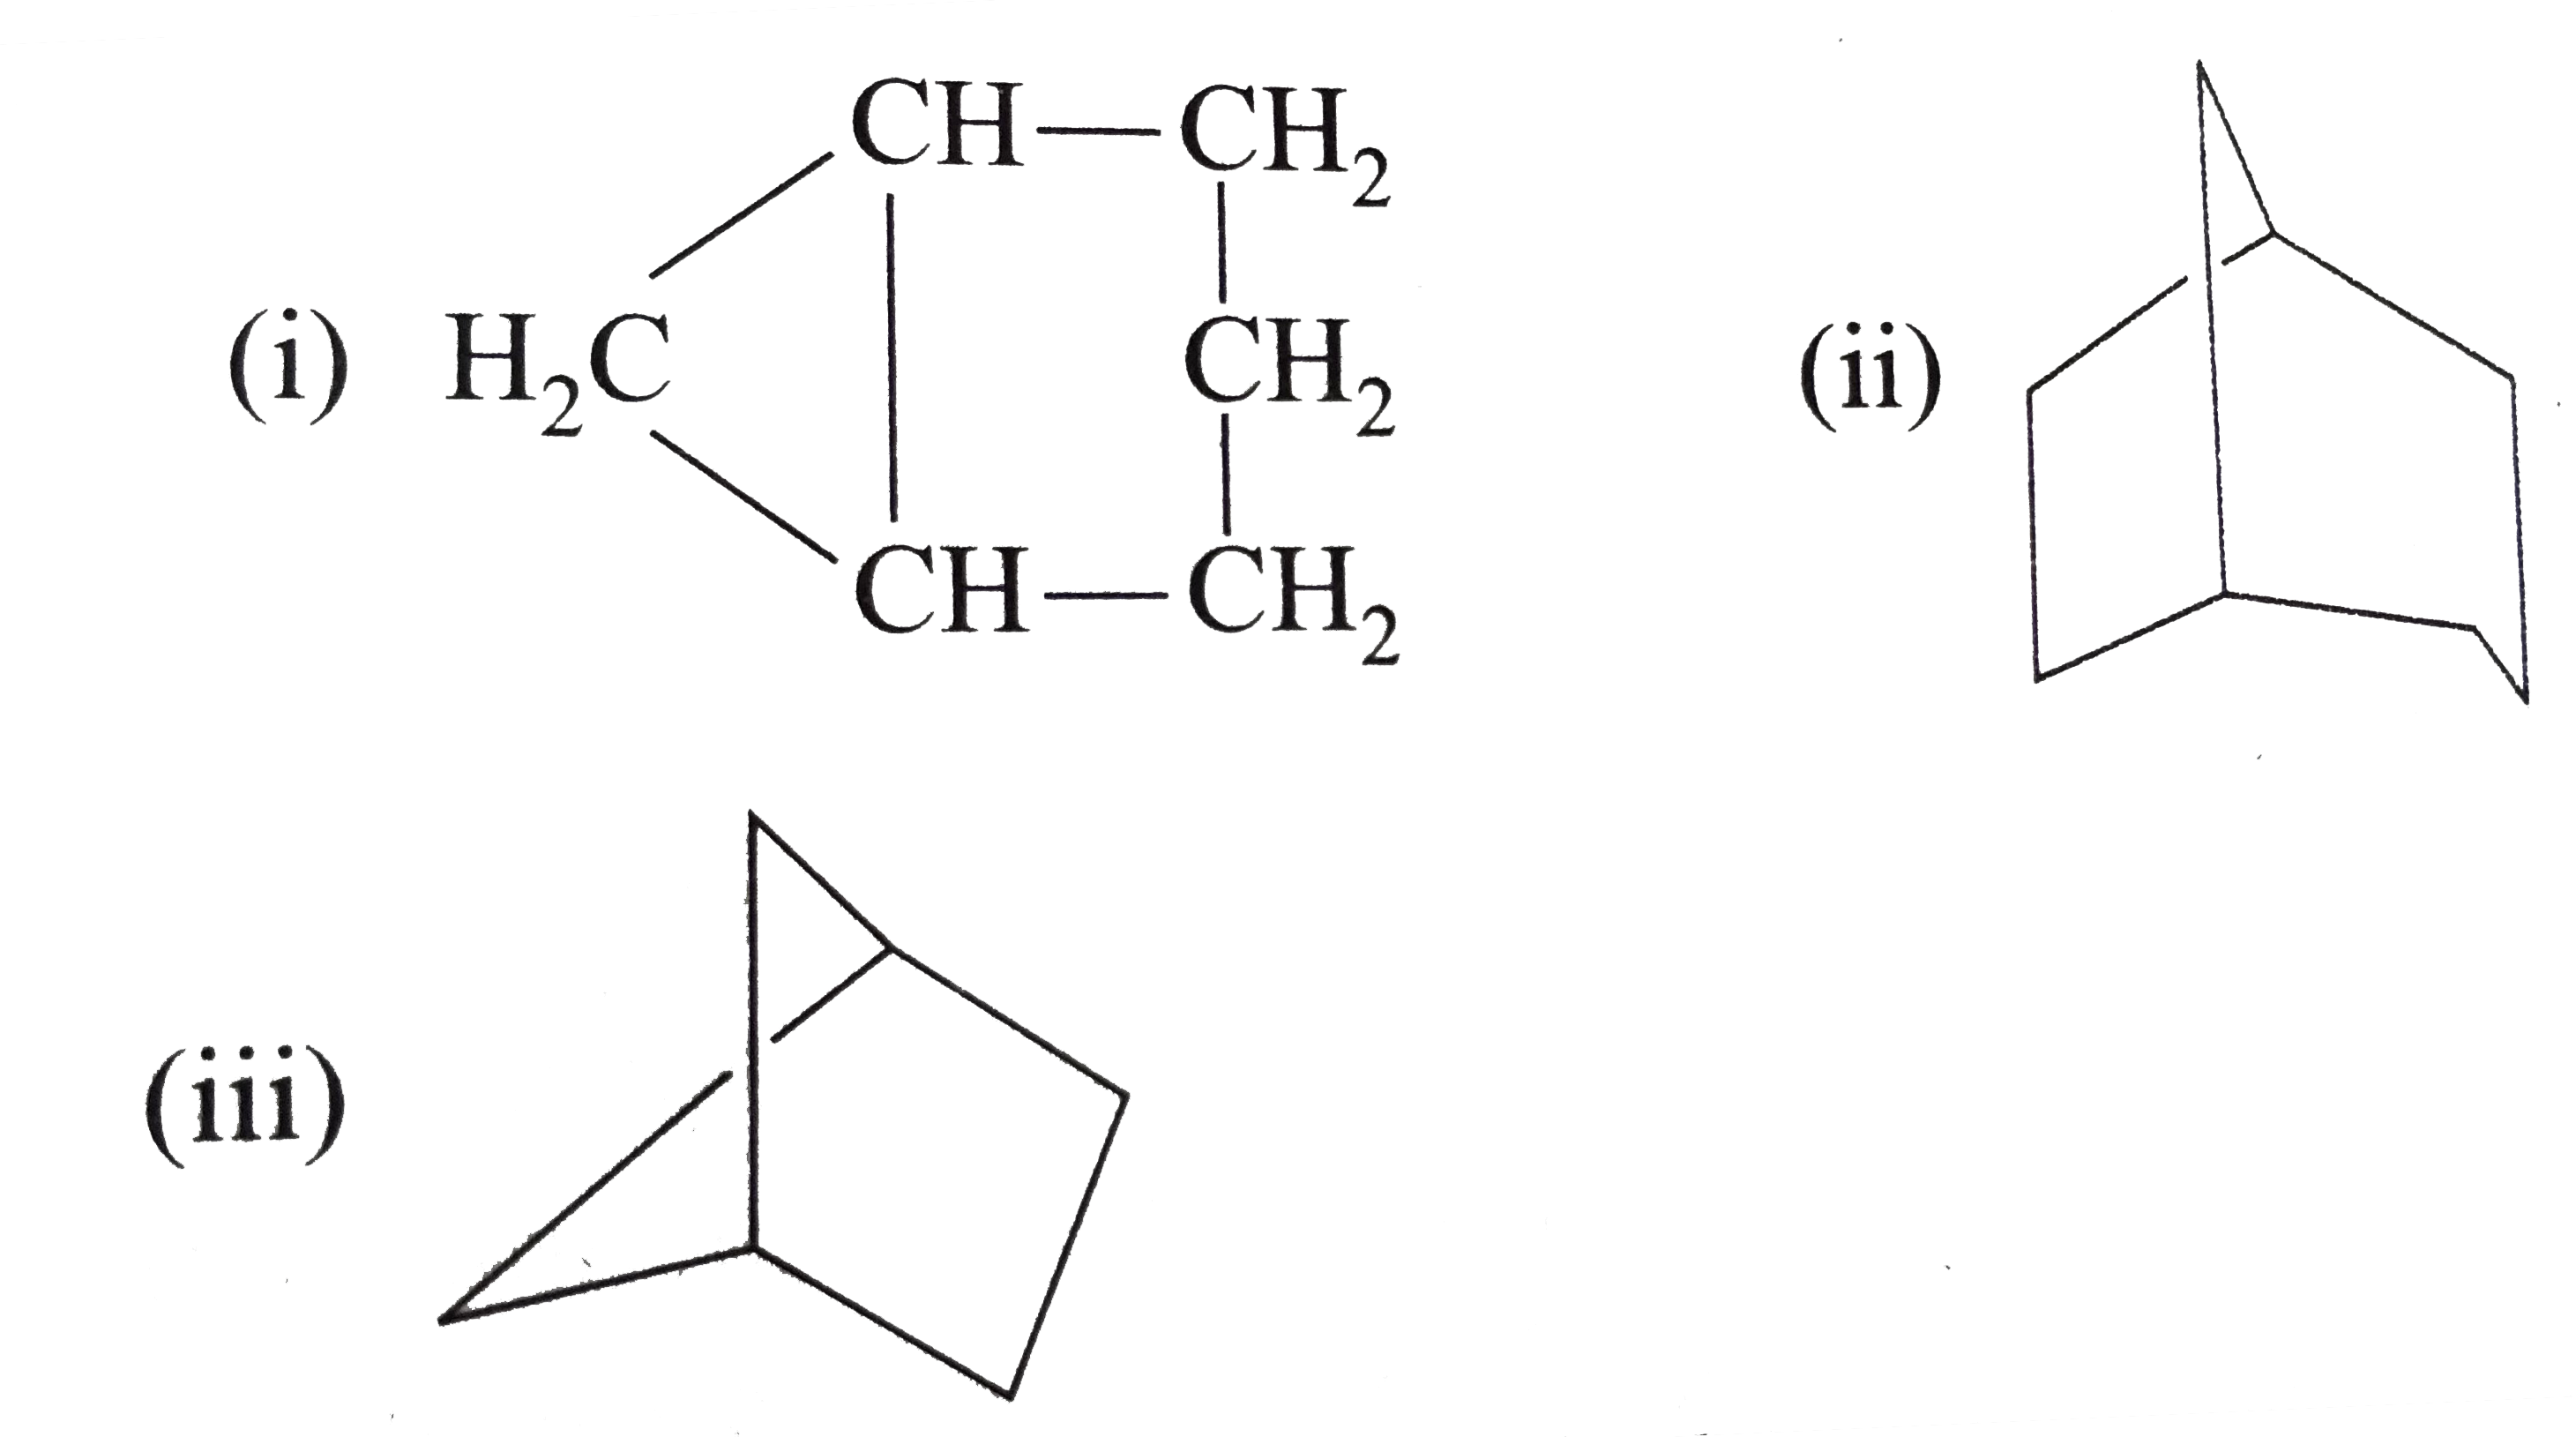 Give the IUPAC names for each of the following bicyclic alkanes:   (i)    Strategy: Combine the prefix bicyclo-with a pair of square brackets enclosing numbers separated by periods. It is then followed by the name of the alkane whose number of C's equals the number of C's in th rings. The bracketed numbers show how many C's are in each bridge and are cited in decreasing order.